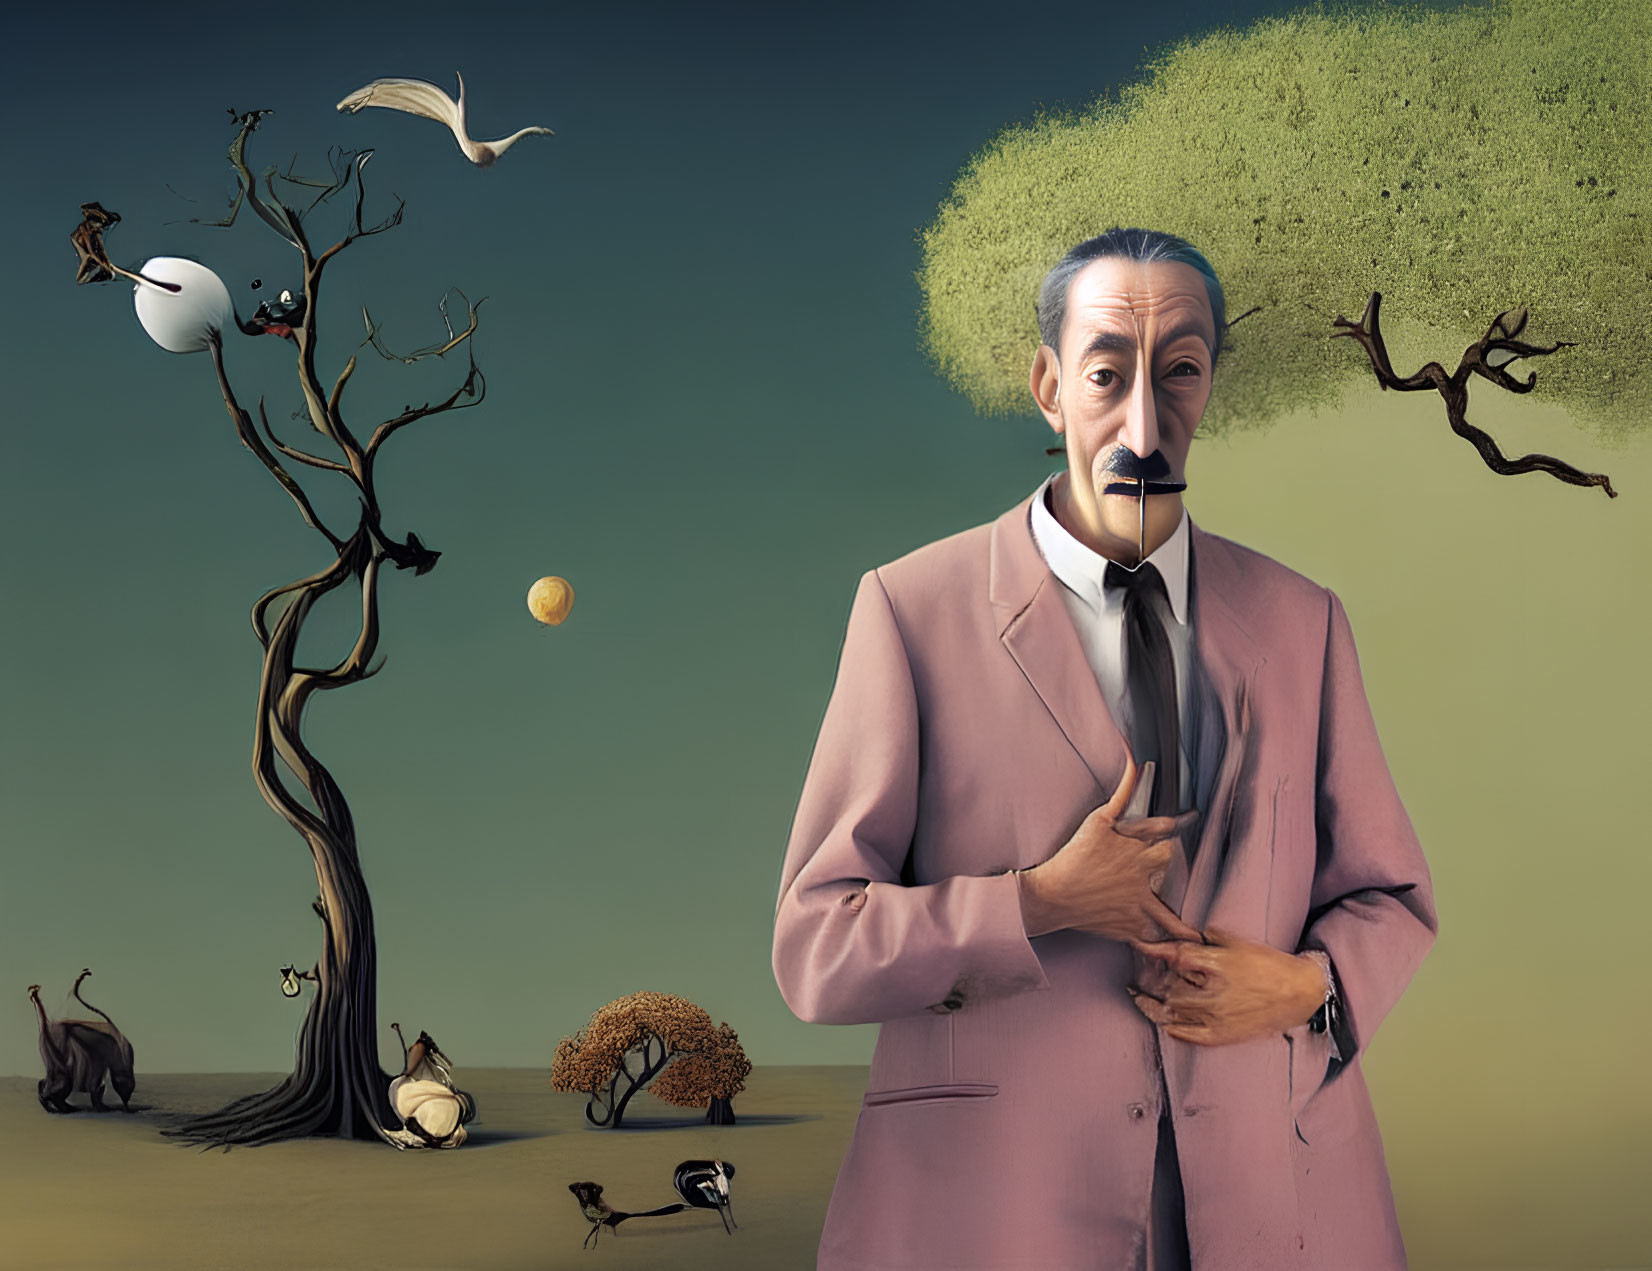 Colorful surreal illustration: man in pink suit, whimsical animals, levitating tree, gradient sky